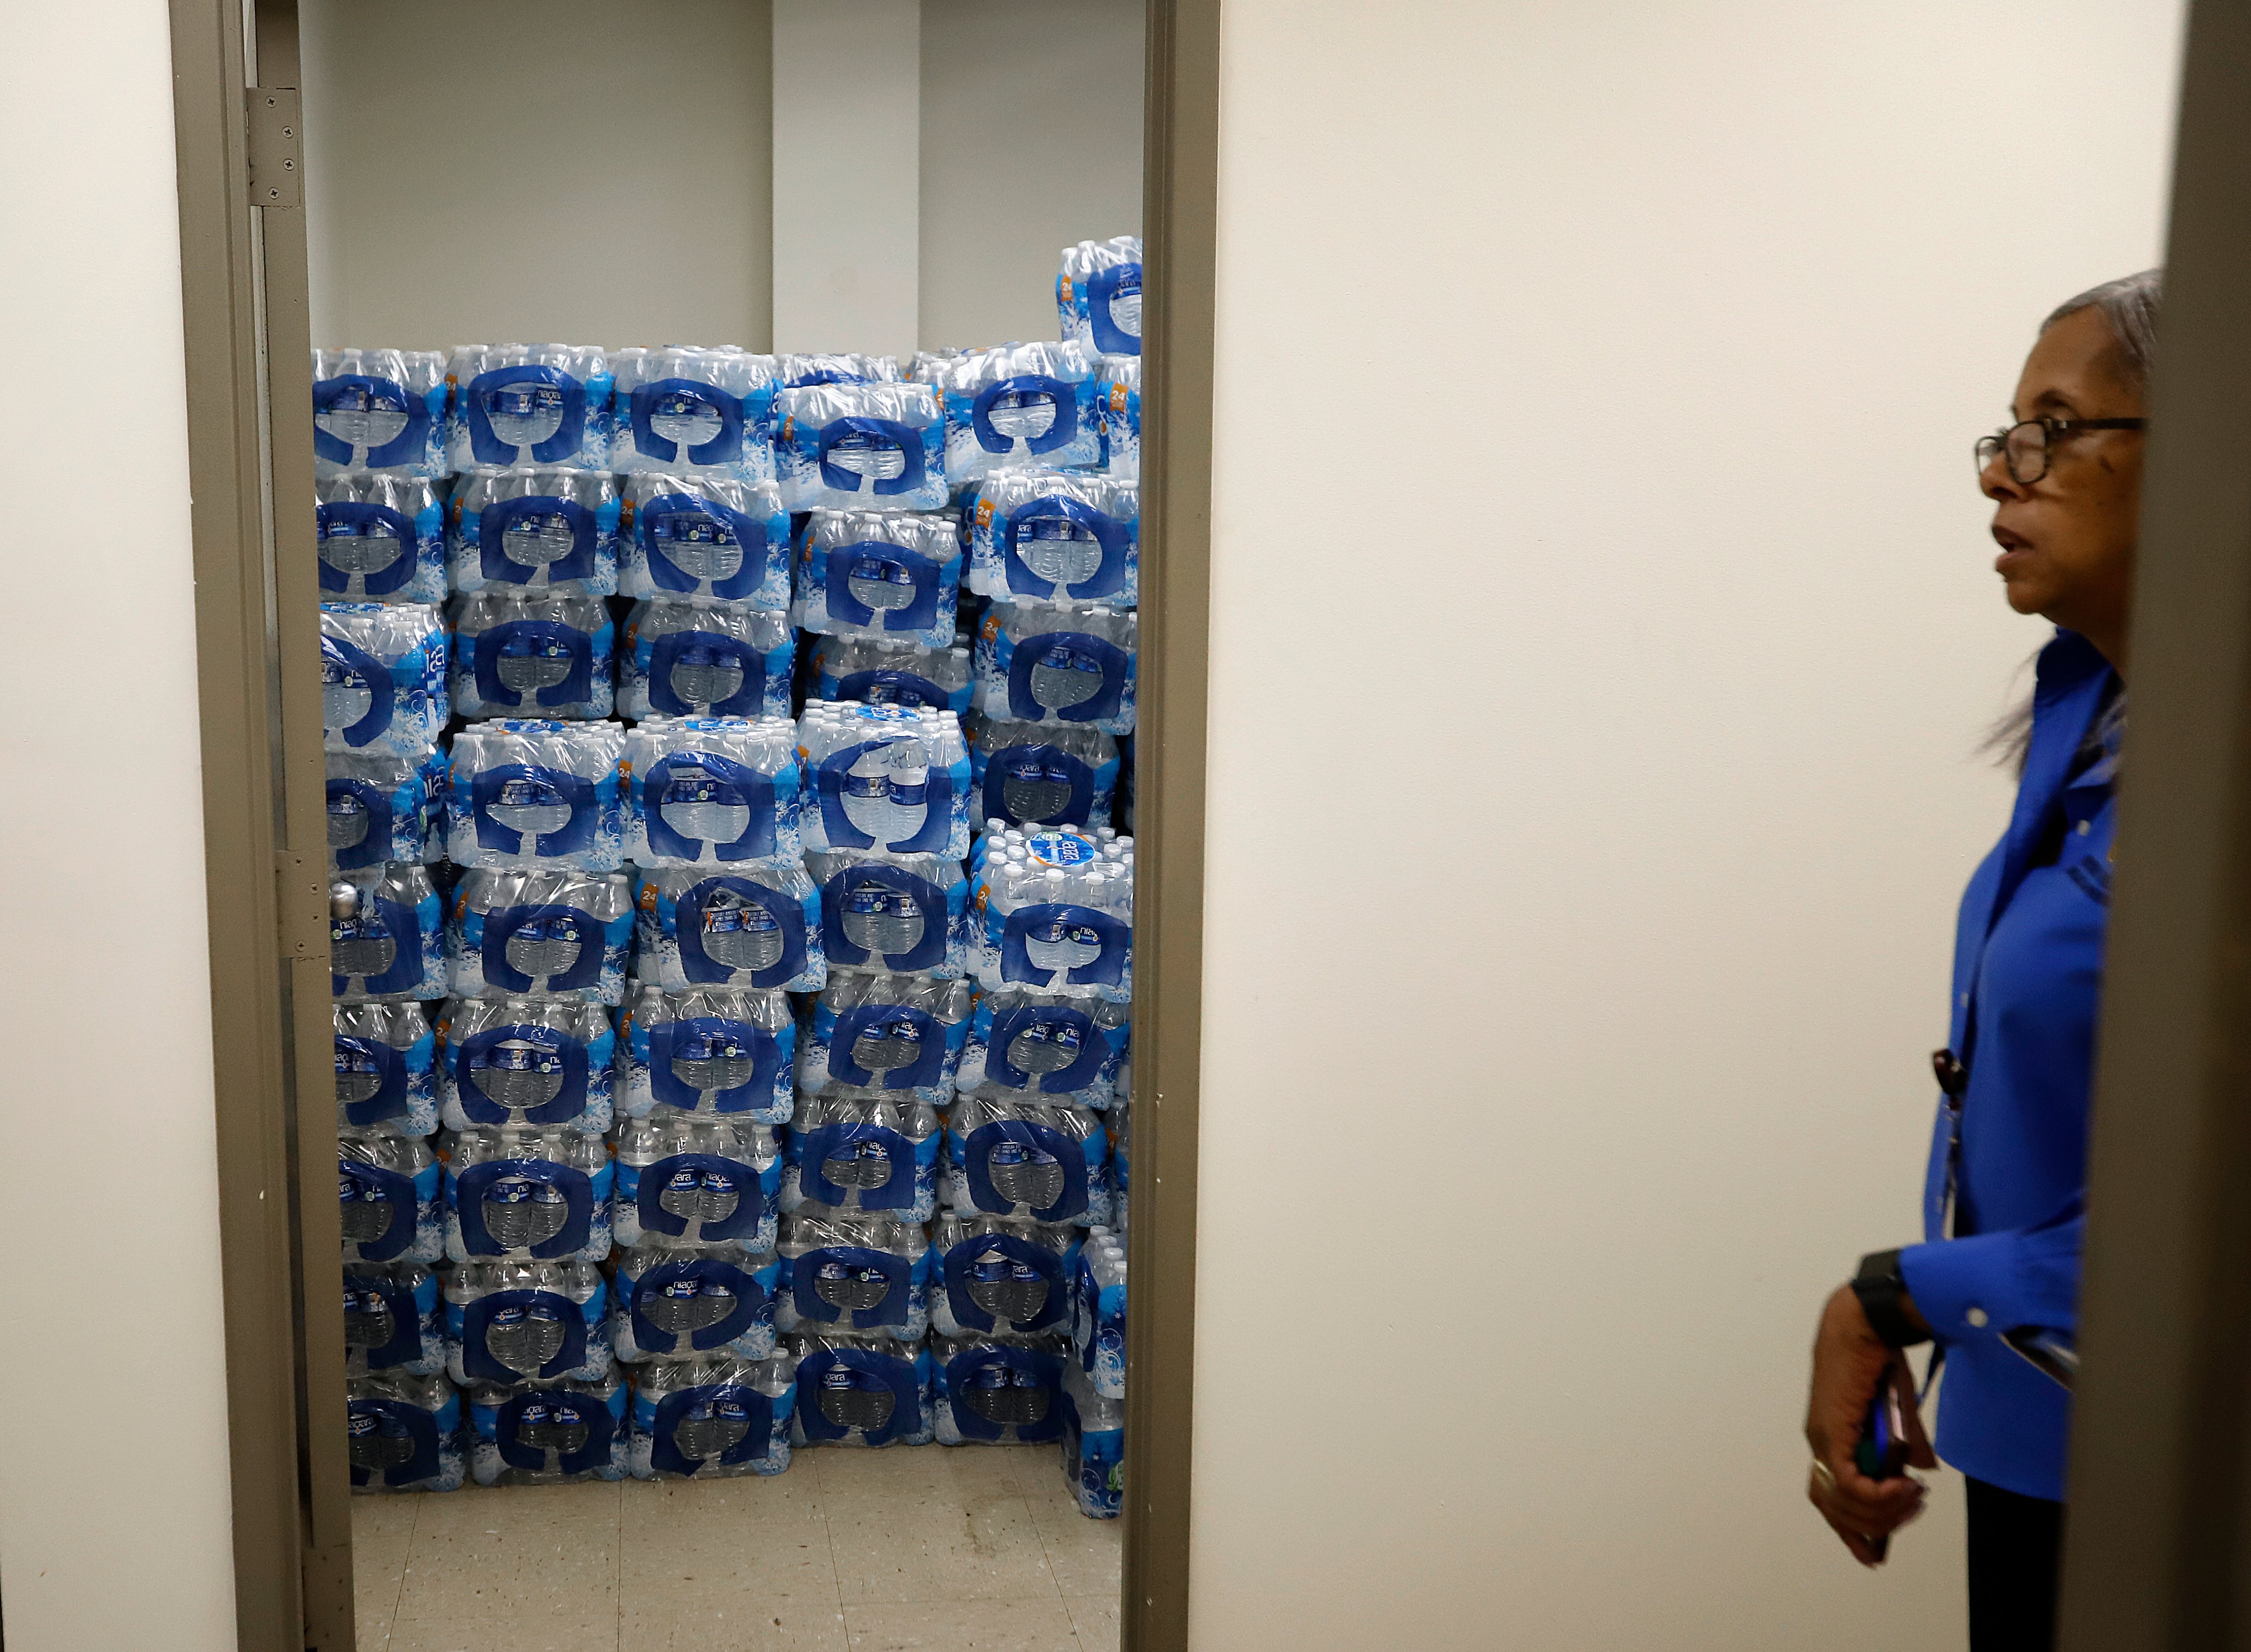 Water is stacked in several rooms scattered around the Newark Health Department, which is acting as a distribution point for fresh water for residents affected by the city's ongoing water crisis due to lead contamination in some tap water. (Rick Loomis&mdash;Getty Images)